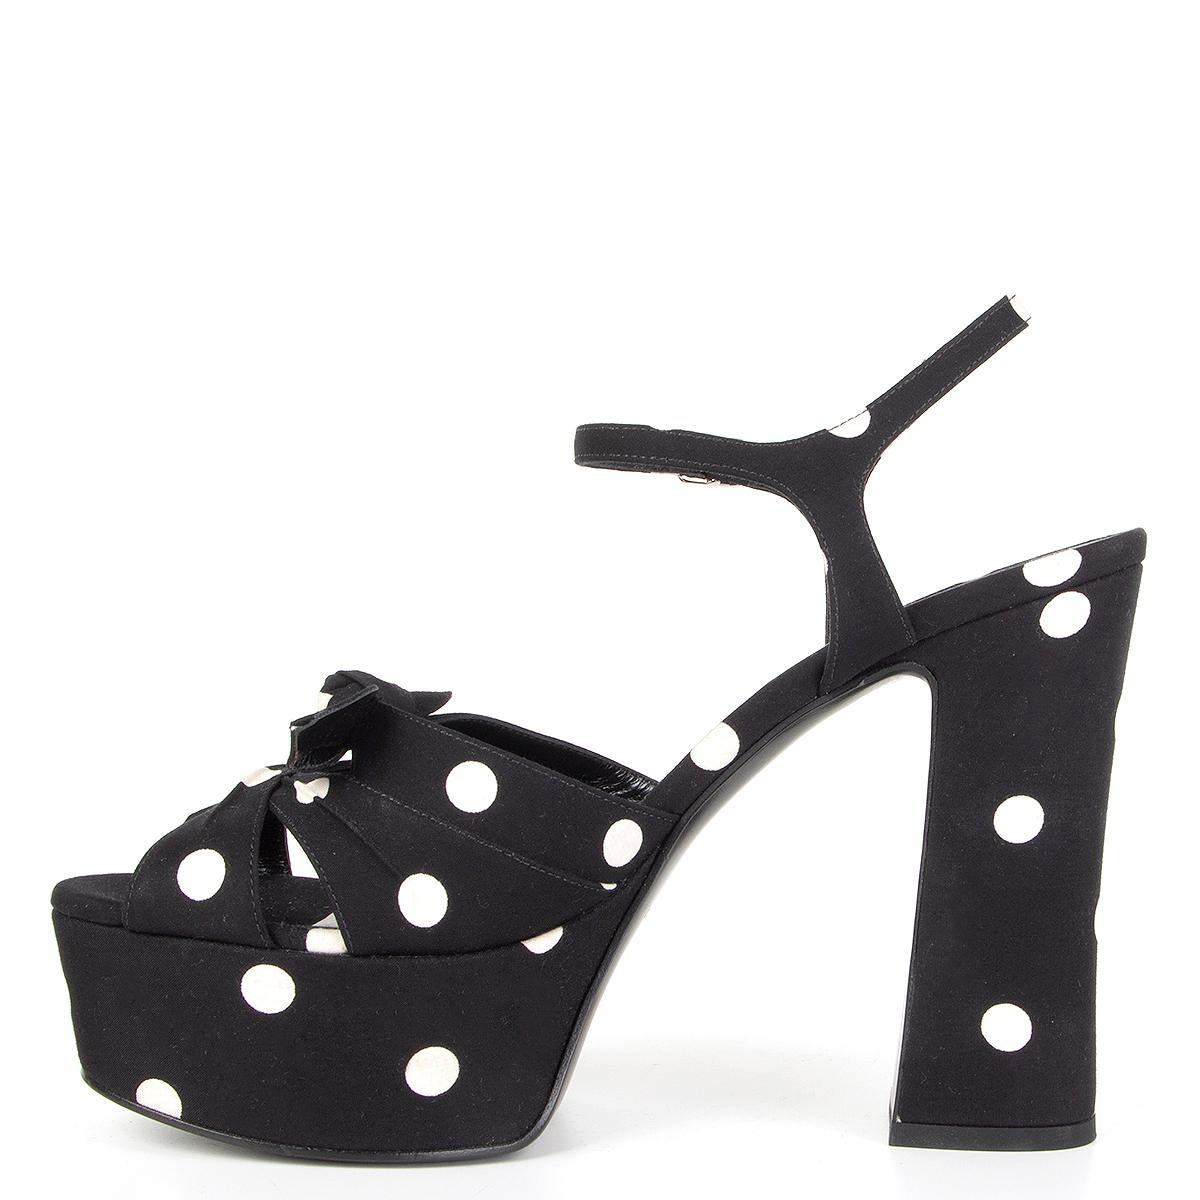 SAINT LAURENT black & white cotton POLKA DOT CANDY Platform Sandals Shoes 40.5 In New Condition For Sale In Zürich, CH